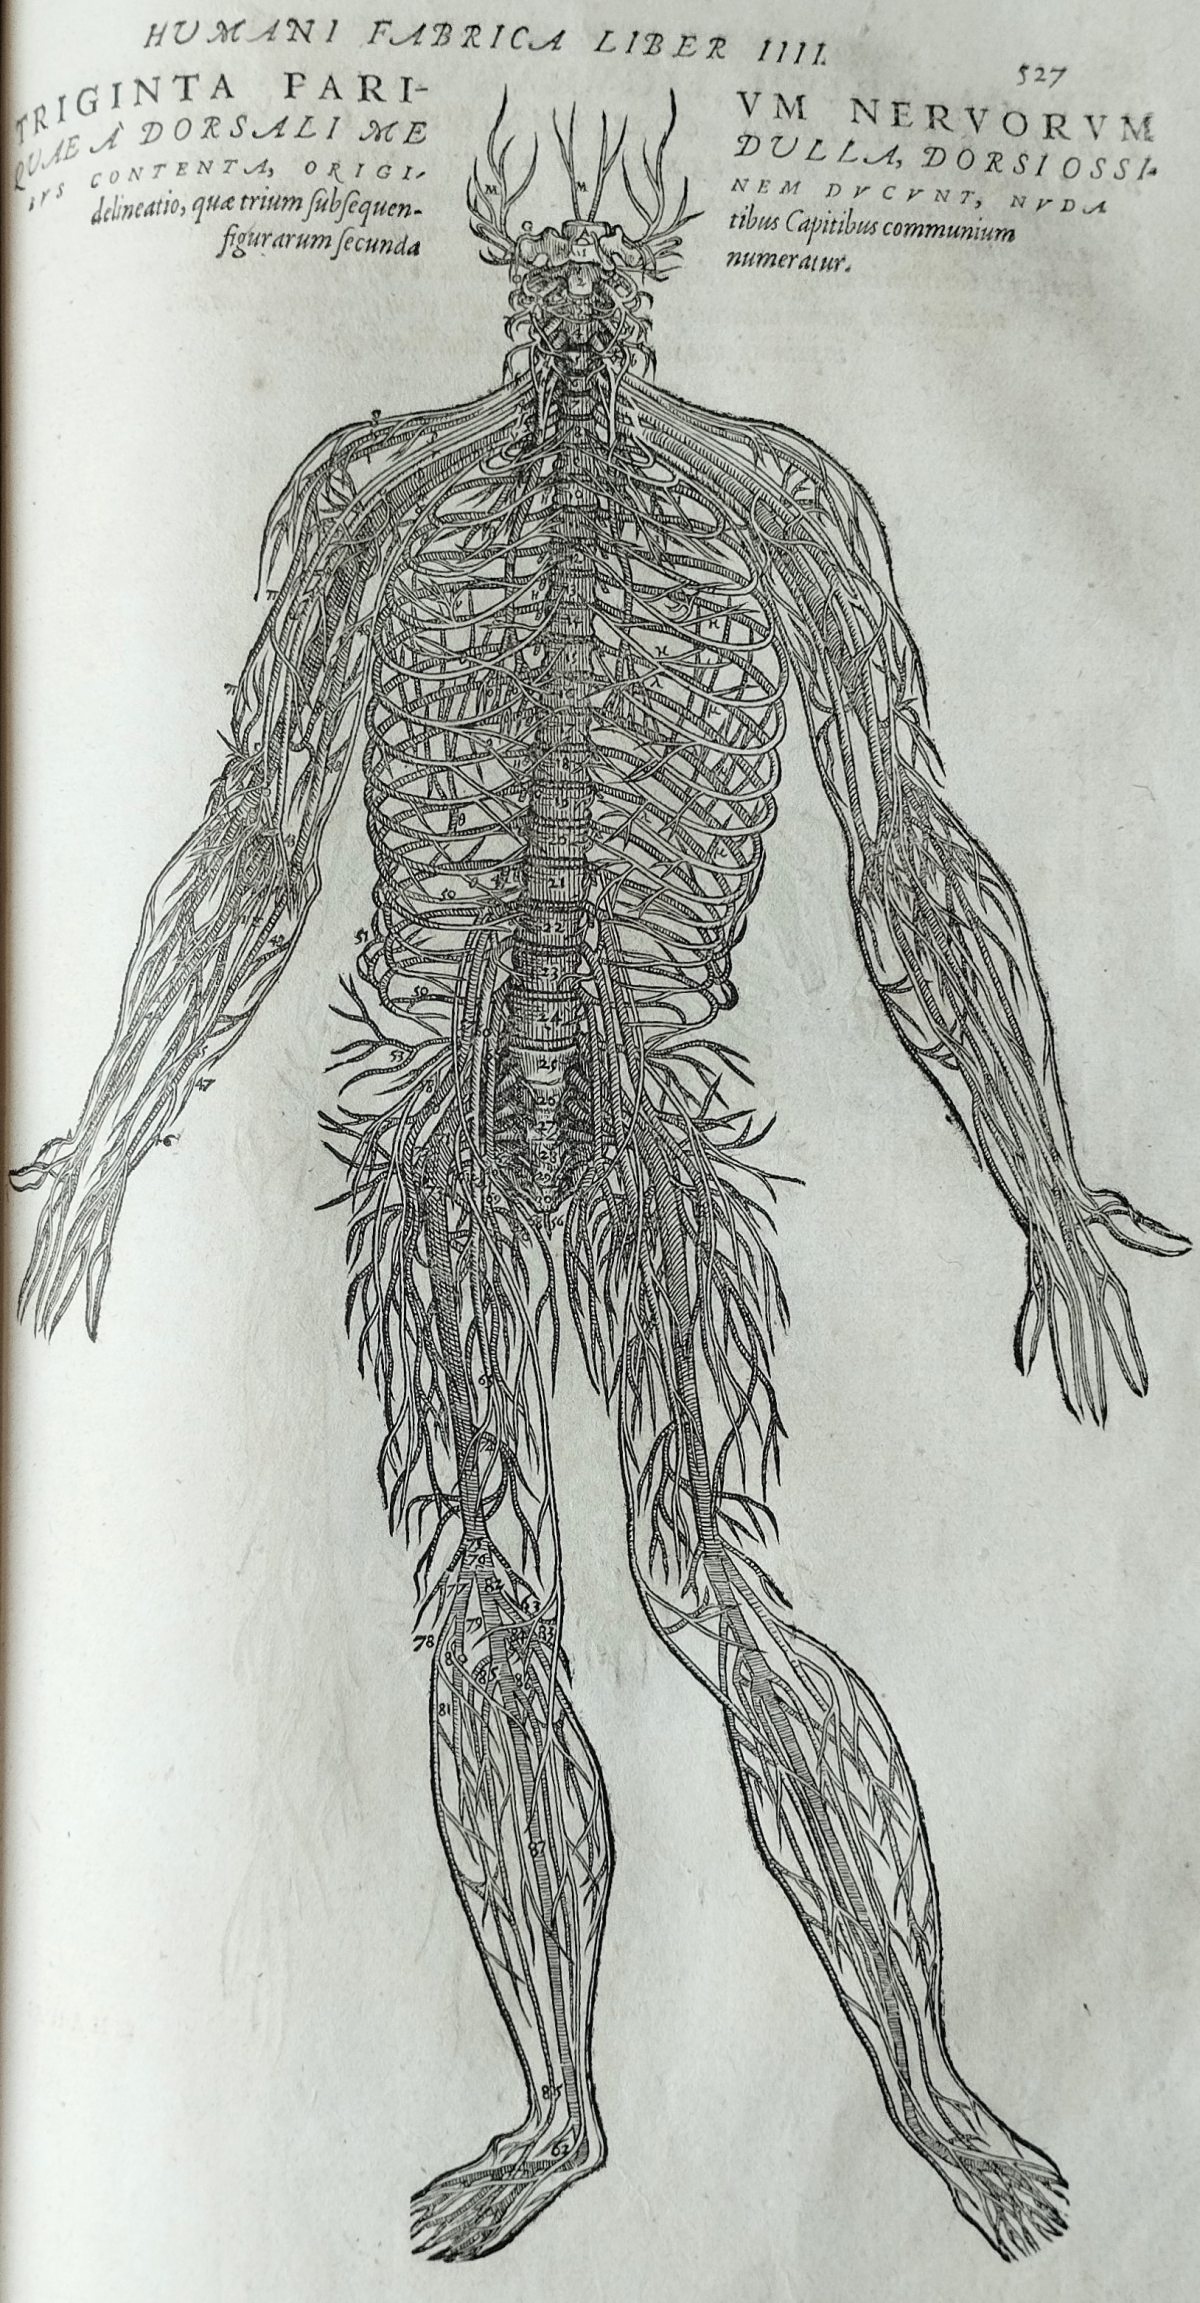 Illustration of all the nerves of the human body displayed as a figure.